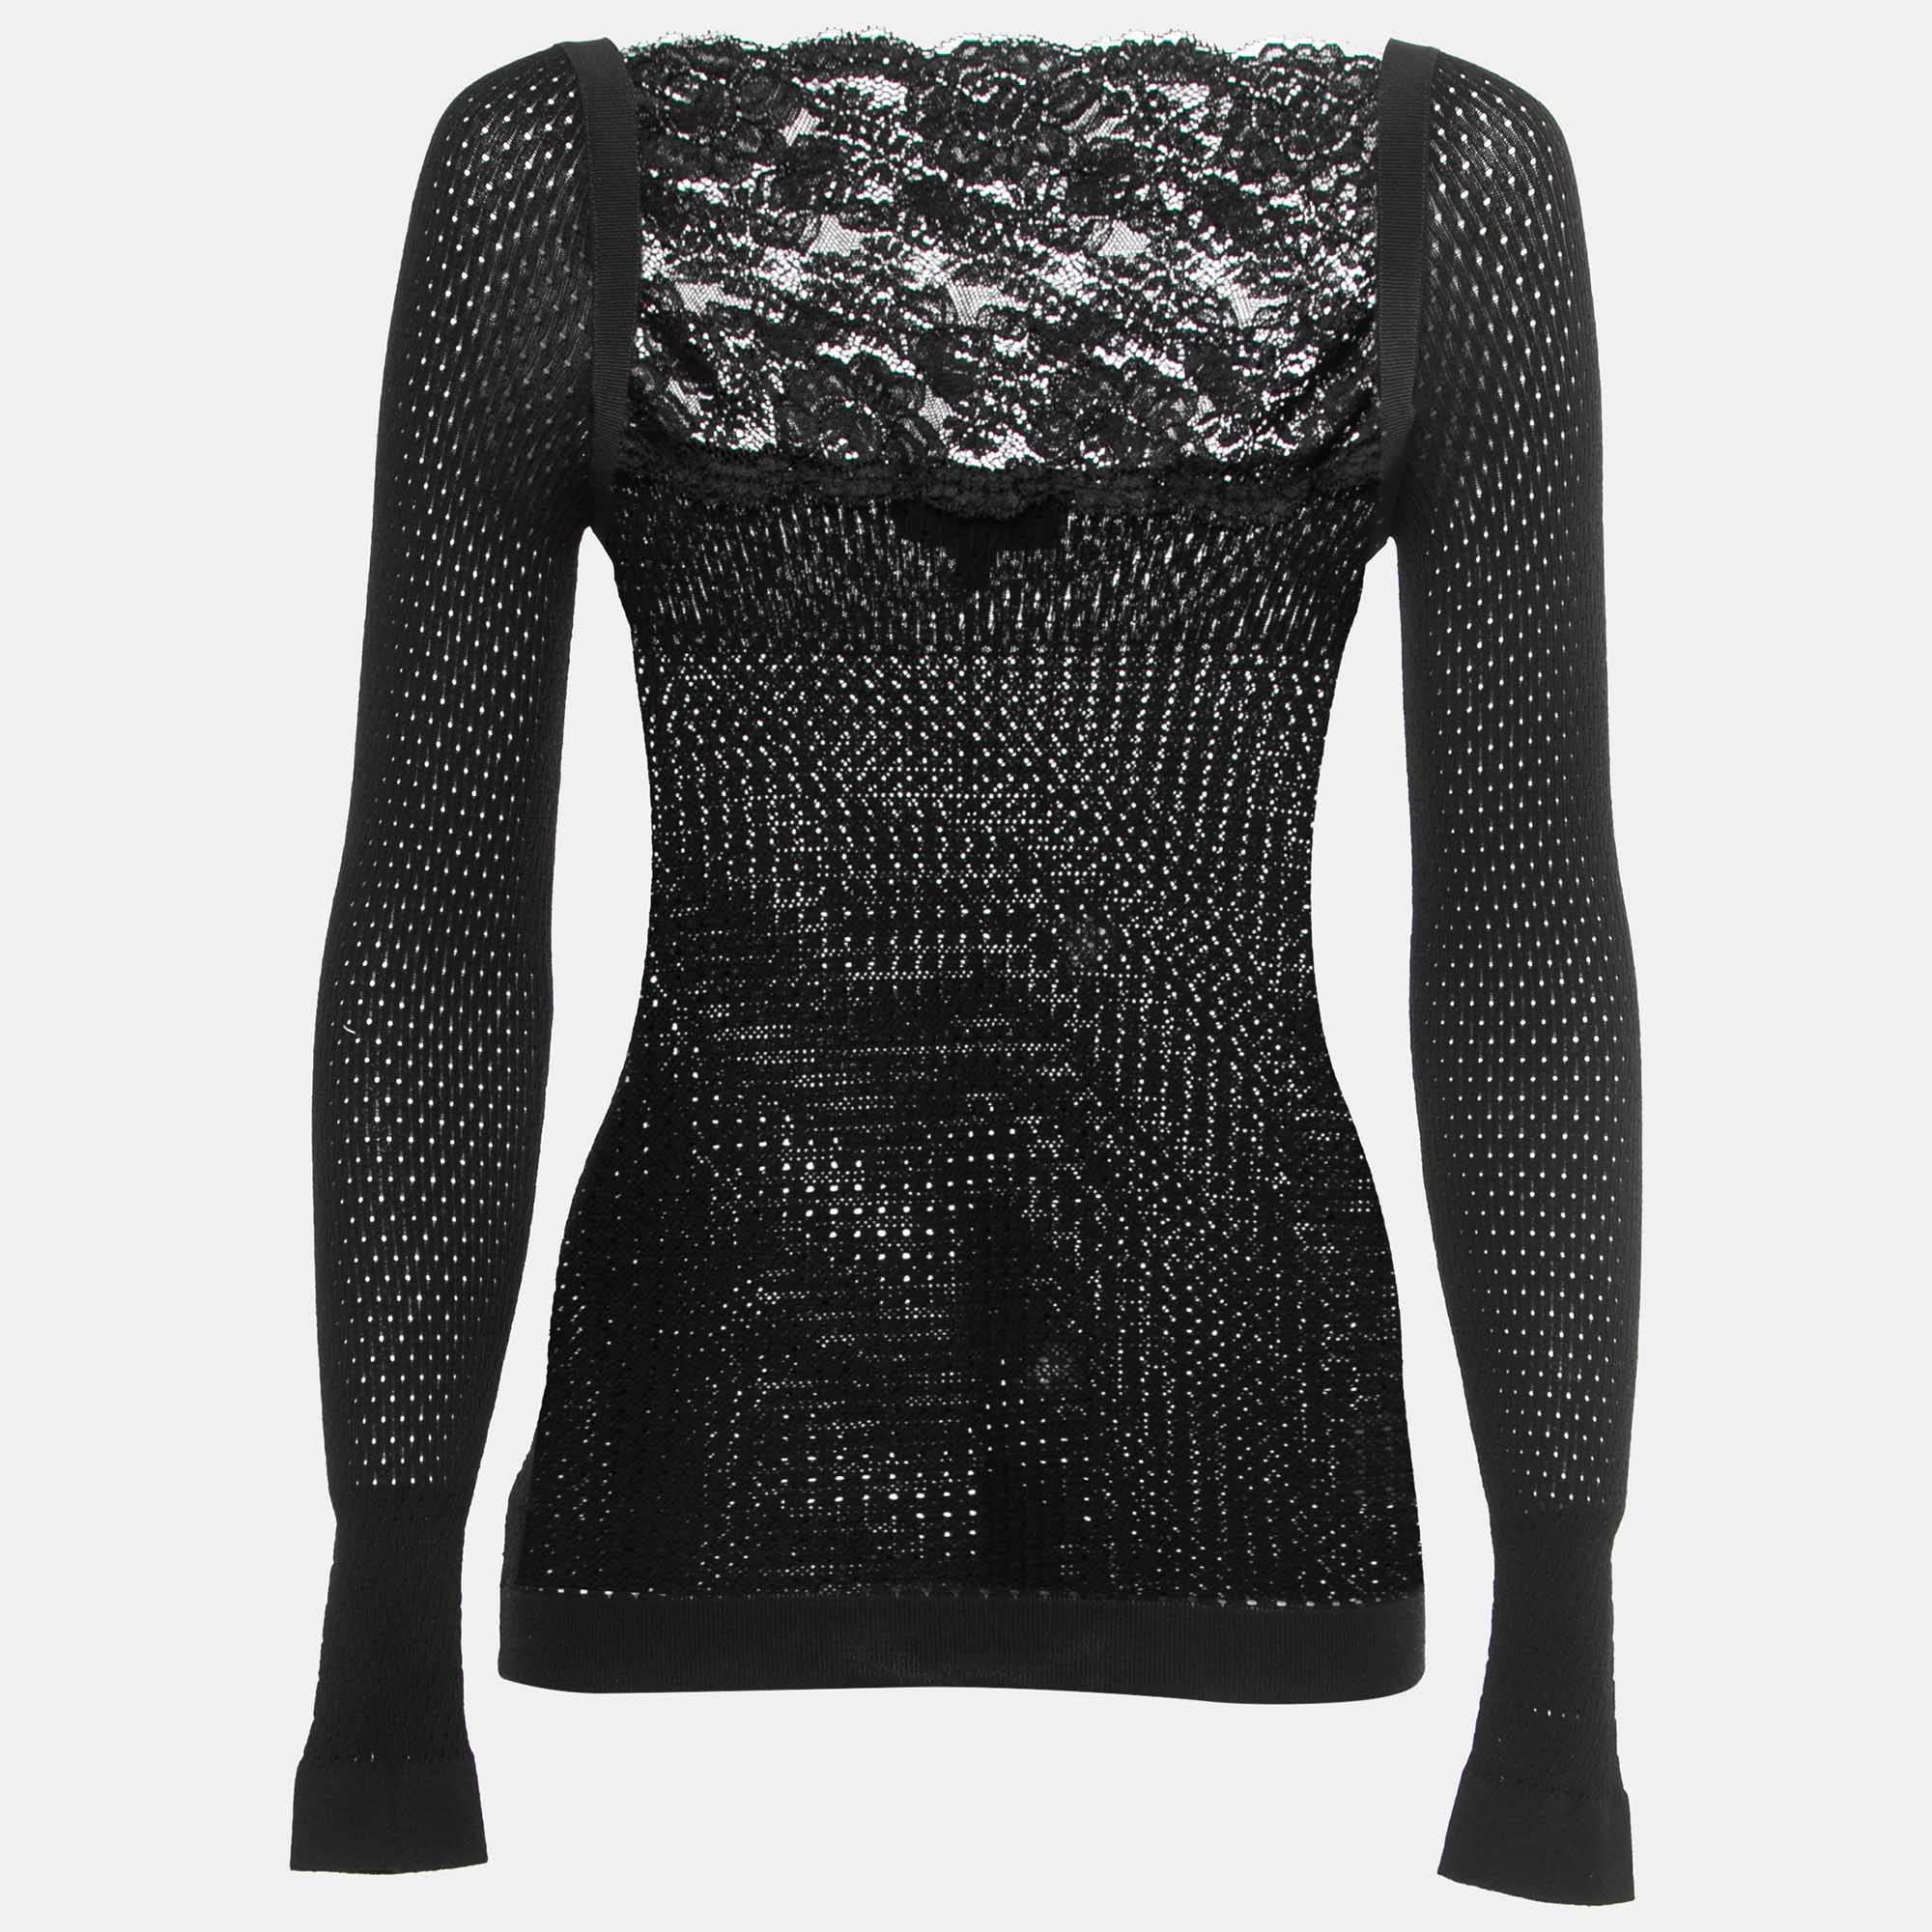 Emporio Armani Black Knit Lace Trim Long Sleeves Top S